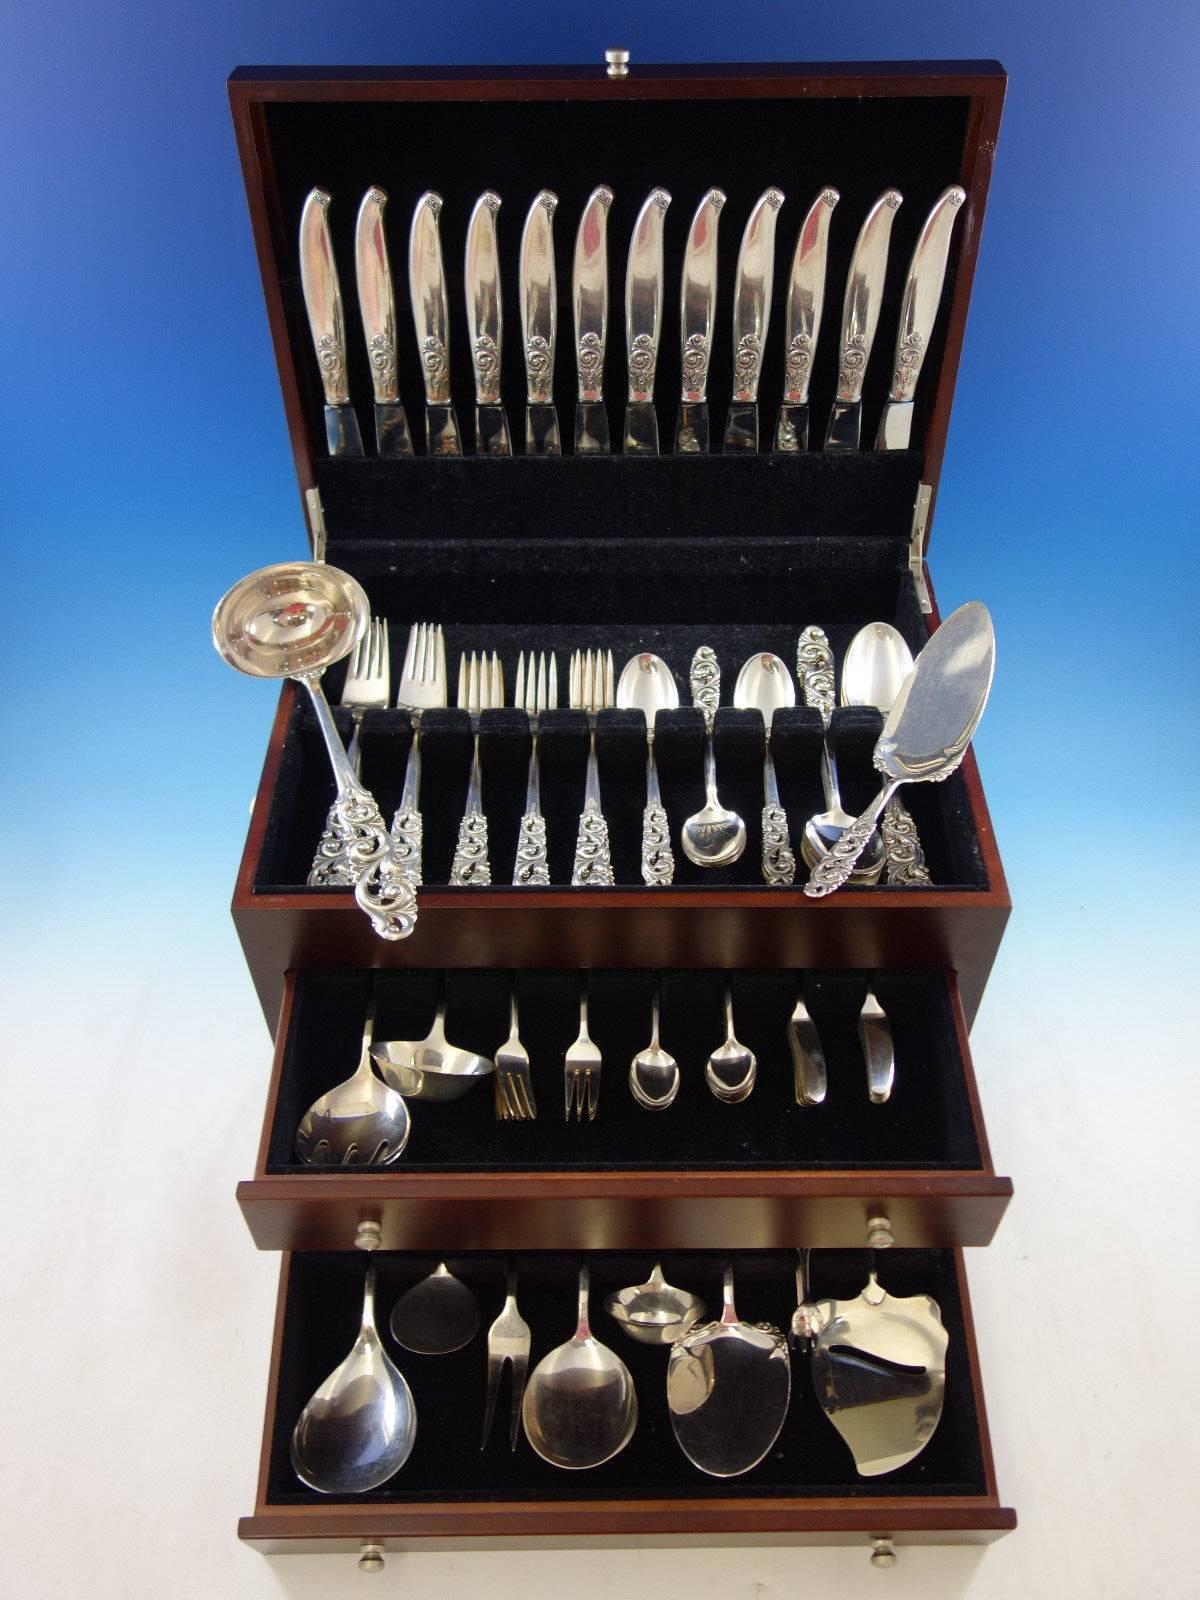 Tele by Mylius Brodrene 830 silver Norwegian flatware set, 110 pieces. This set features pierced handles and includes: 

12 dinner knives, 8 3/4